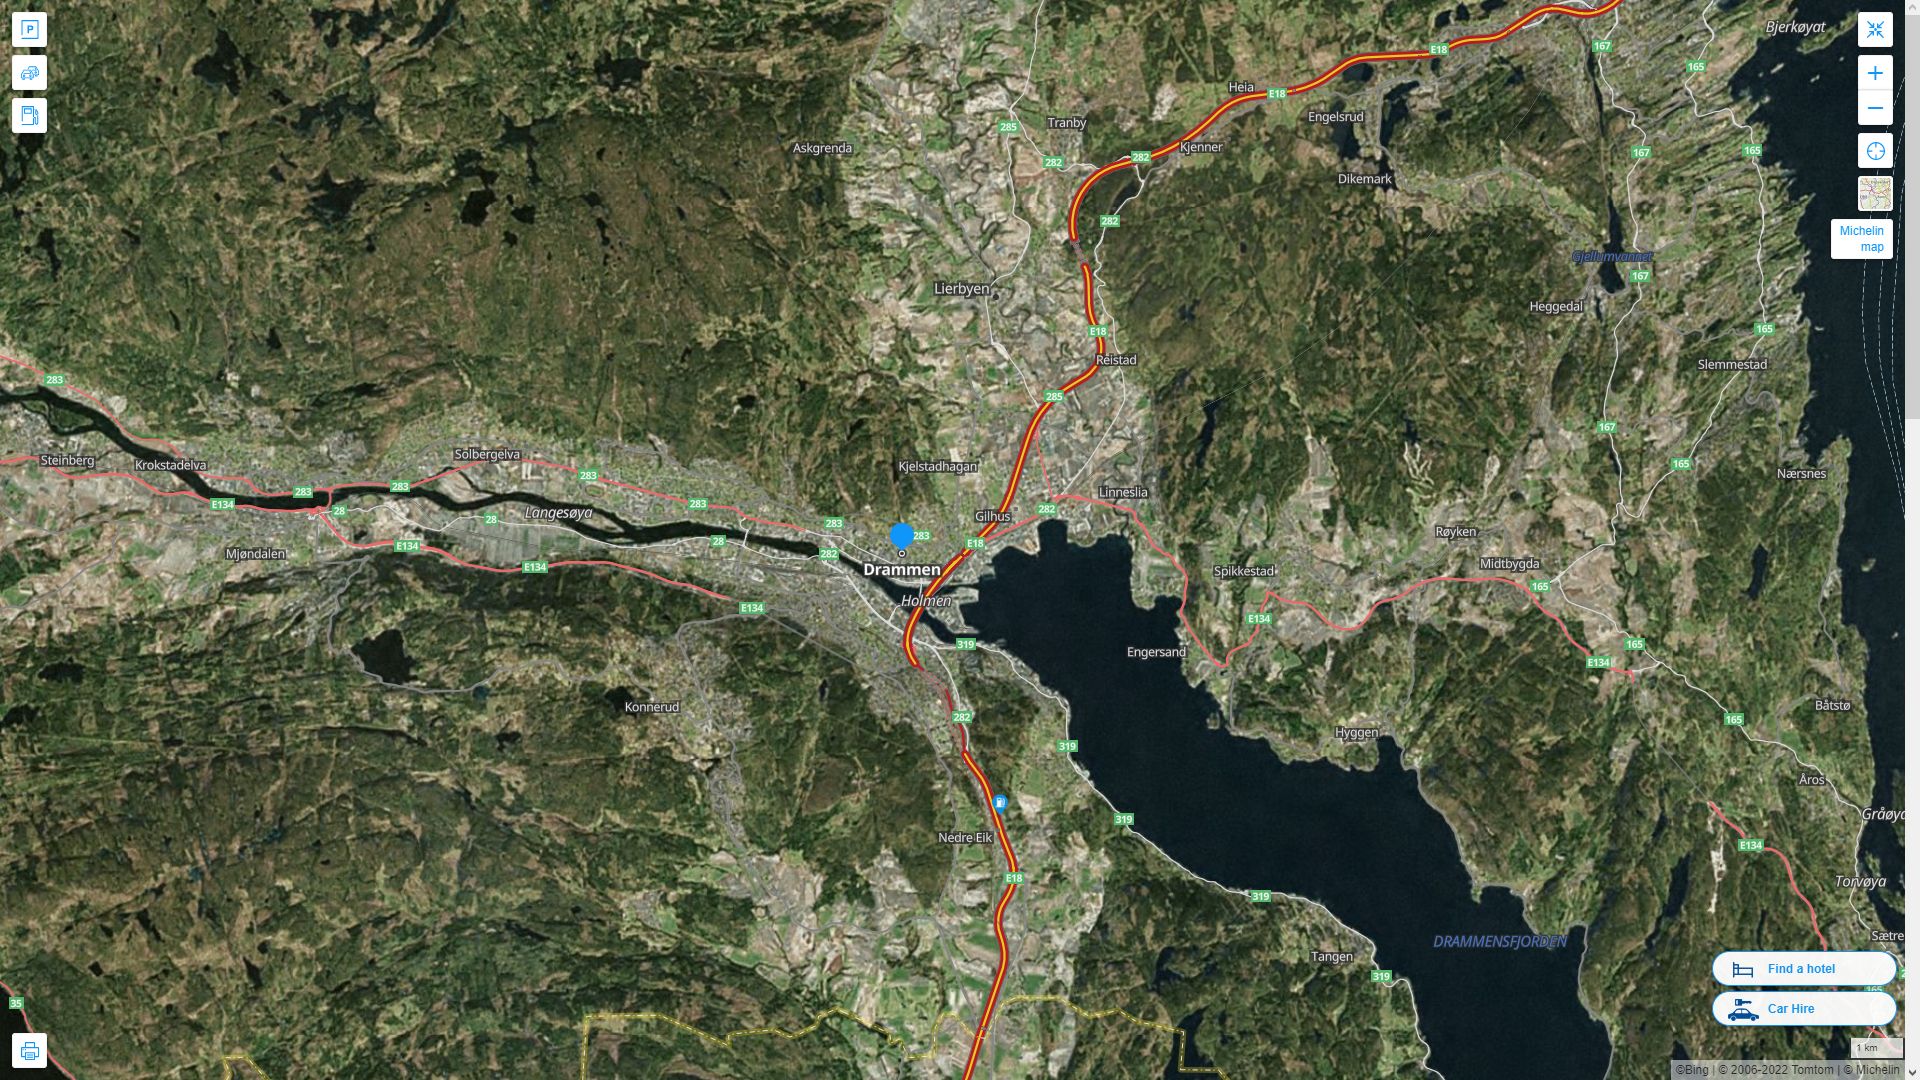 Drammen Highway and Road Map with Satellite View